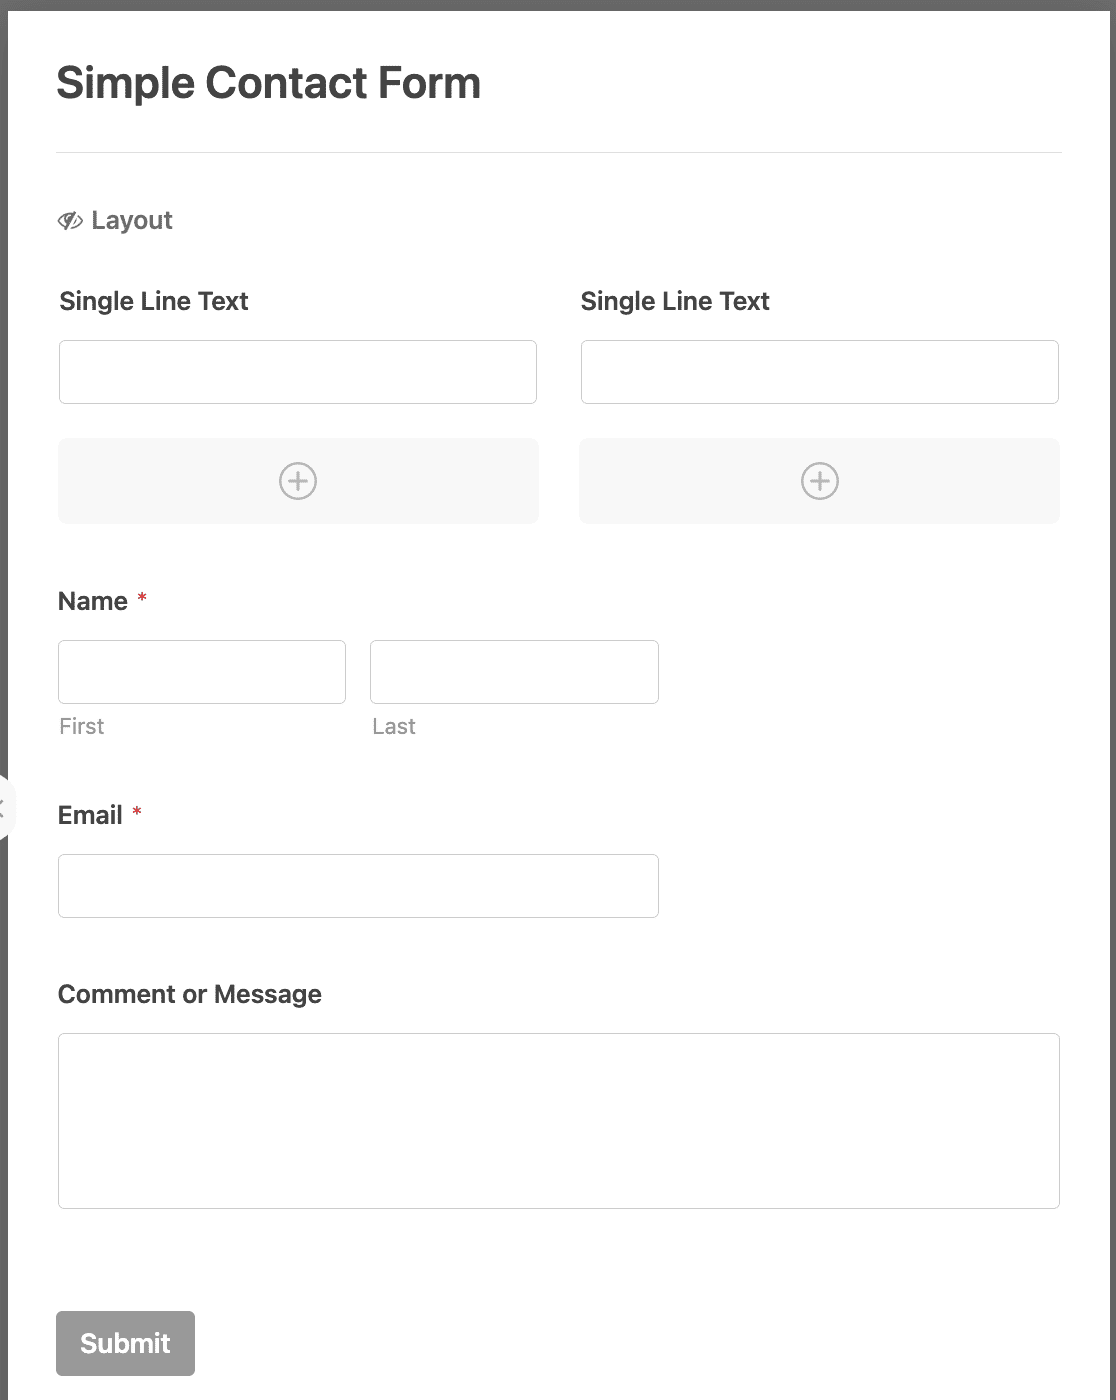 Adding 2 Single Line Text fields to a Layout field